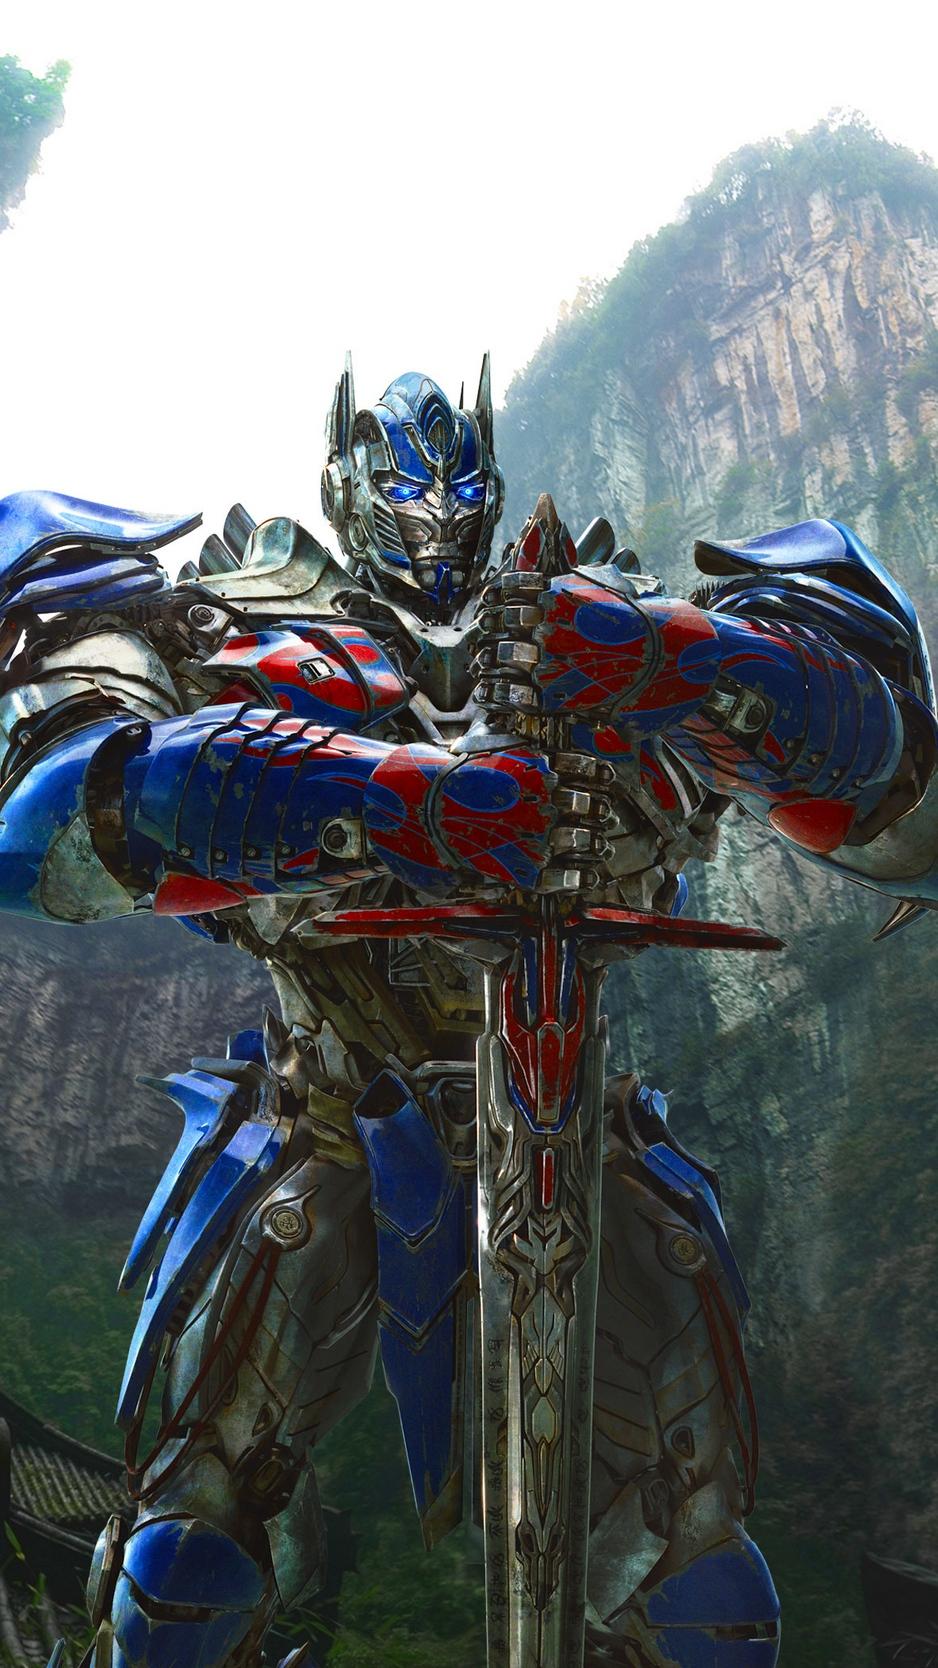 Download wallpapers 938x1668 transformers age of extinction